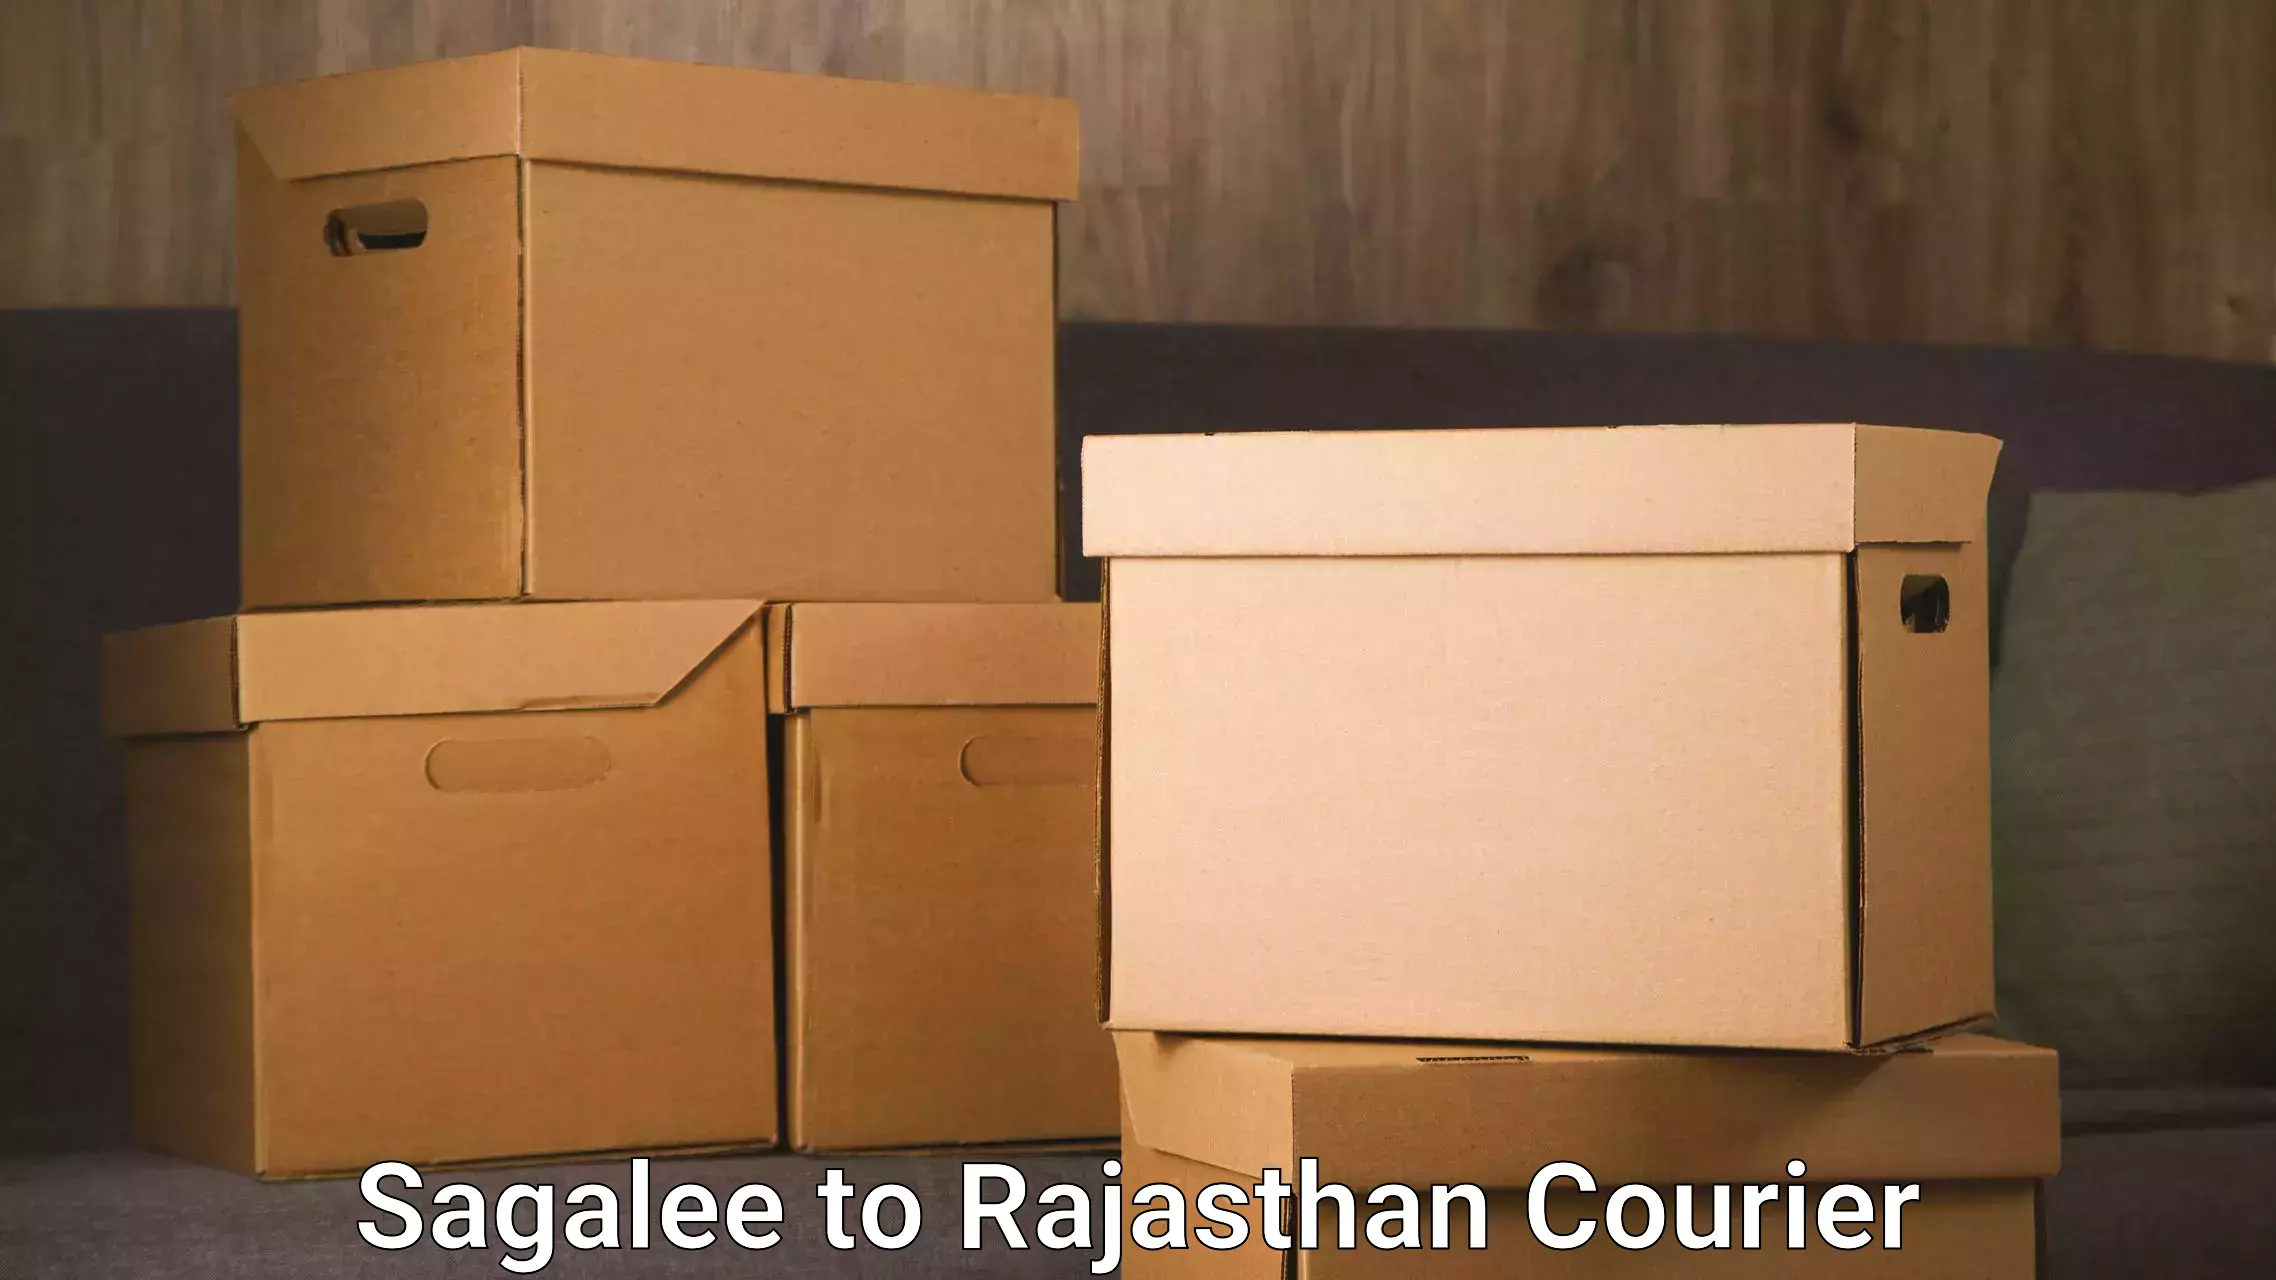 24/7 courier service Sagalee to Rajasthan